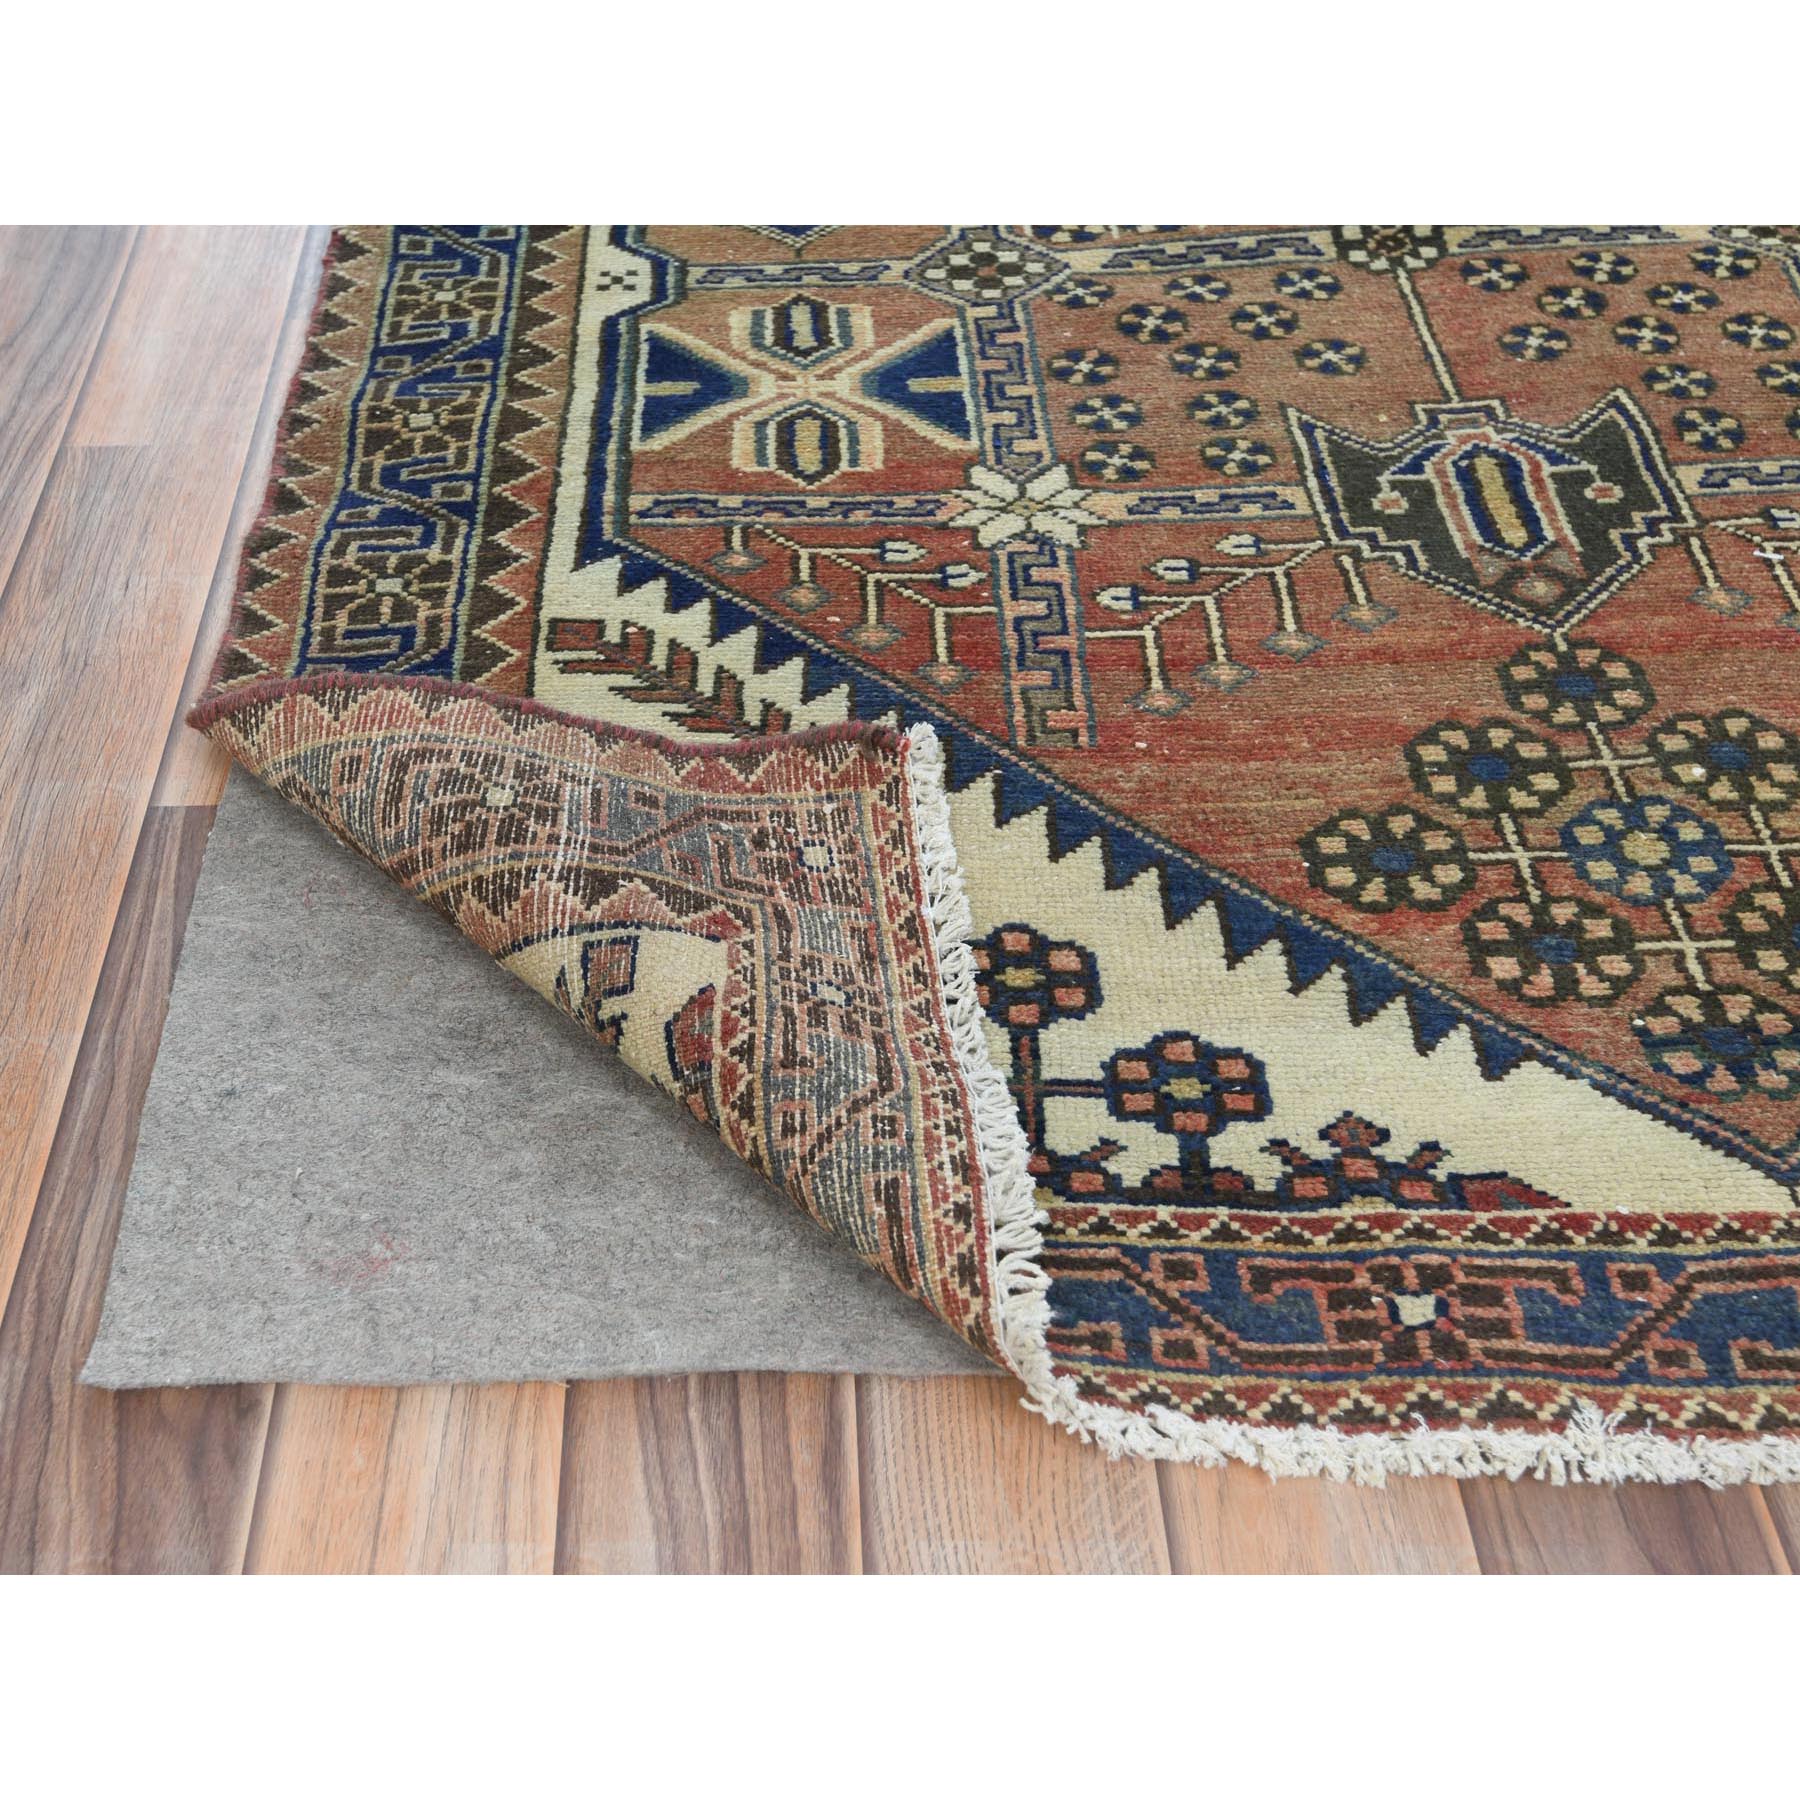 4'x10' Mocha Brown with a Mix of Red Vintage Persian Heriz, Hand Woven, Abrash, Distressed Look, Cropped Thin, Pure Wool Wide Runner Oriental Rug 